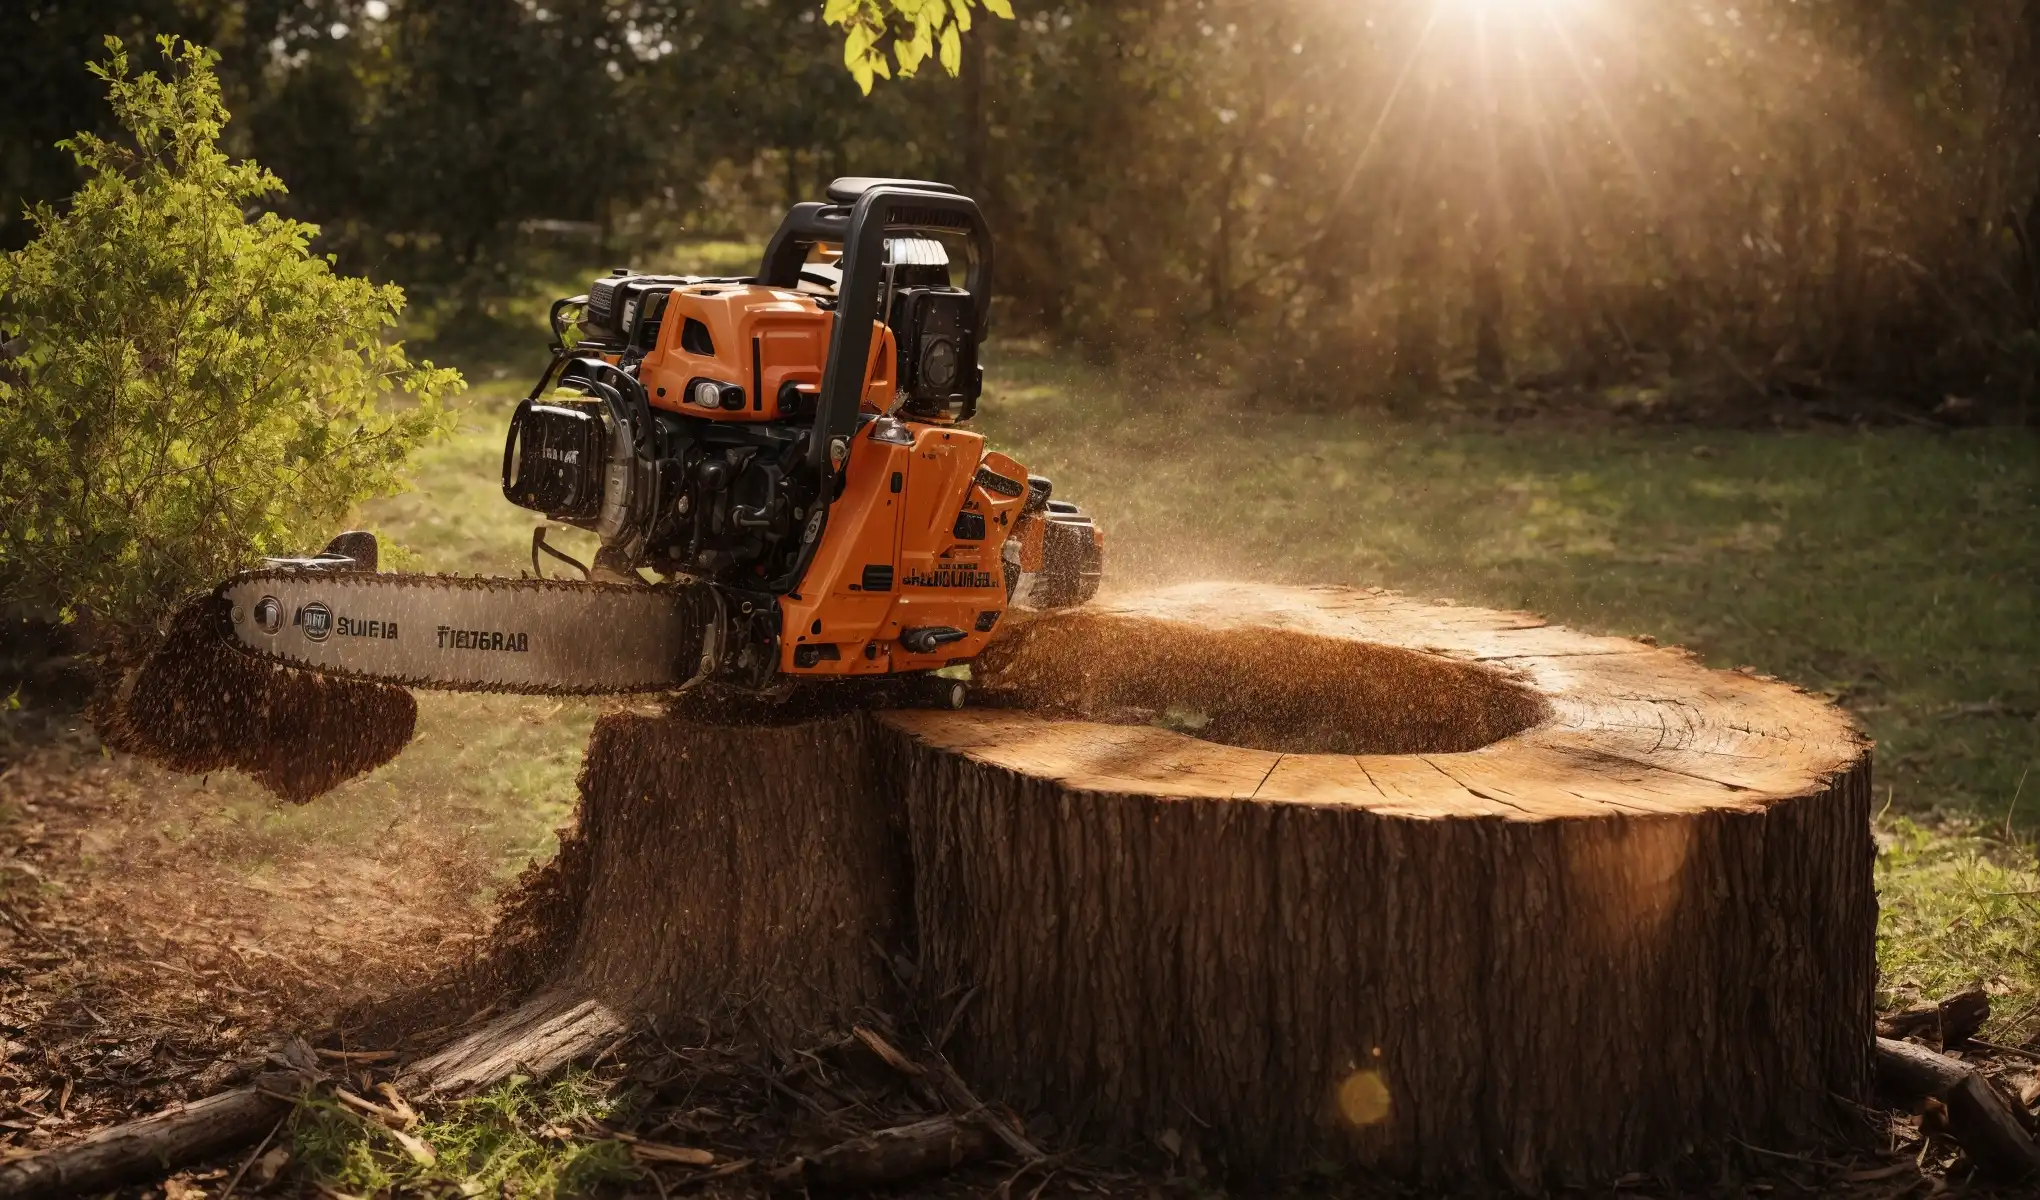 How to Remove a Tree Stump With a Chainsaw: A Step-by-Step Guide